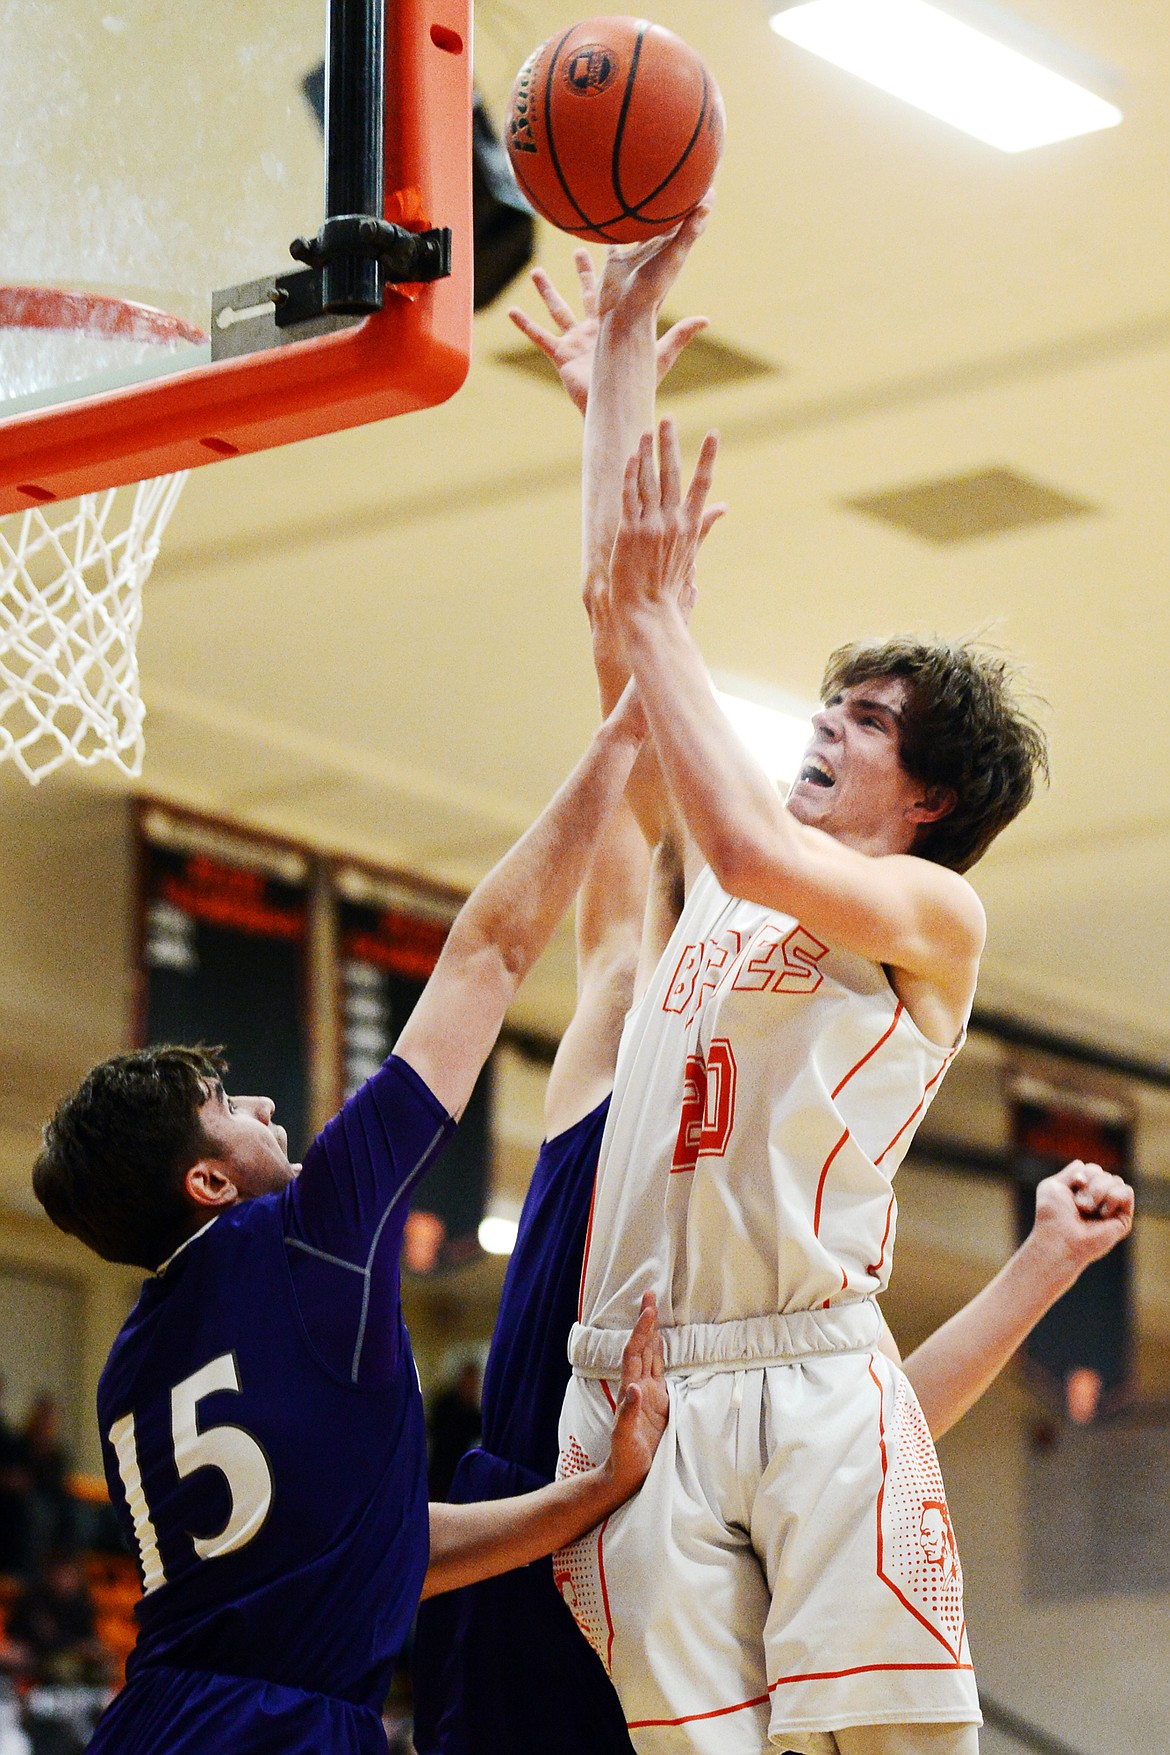 Flathead's Cooper Smith (20) drives to the basket against Butte at Flathead High School on Friday. (Casey Kreider/Daily Inter Lake)